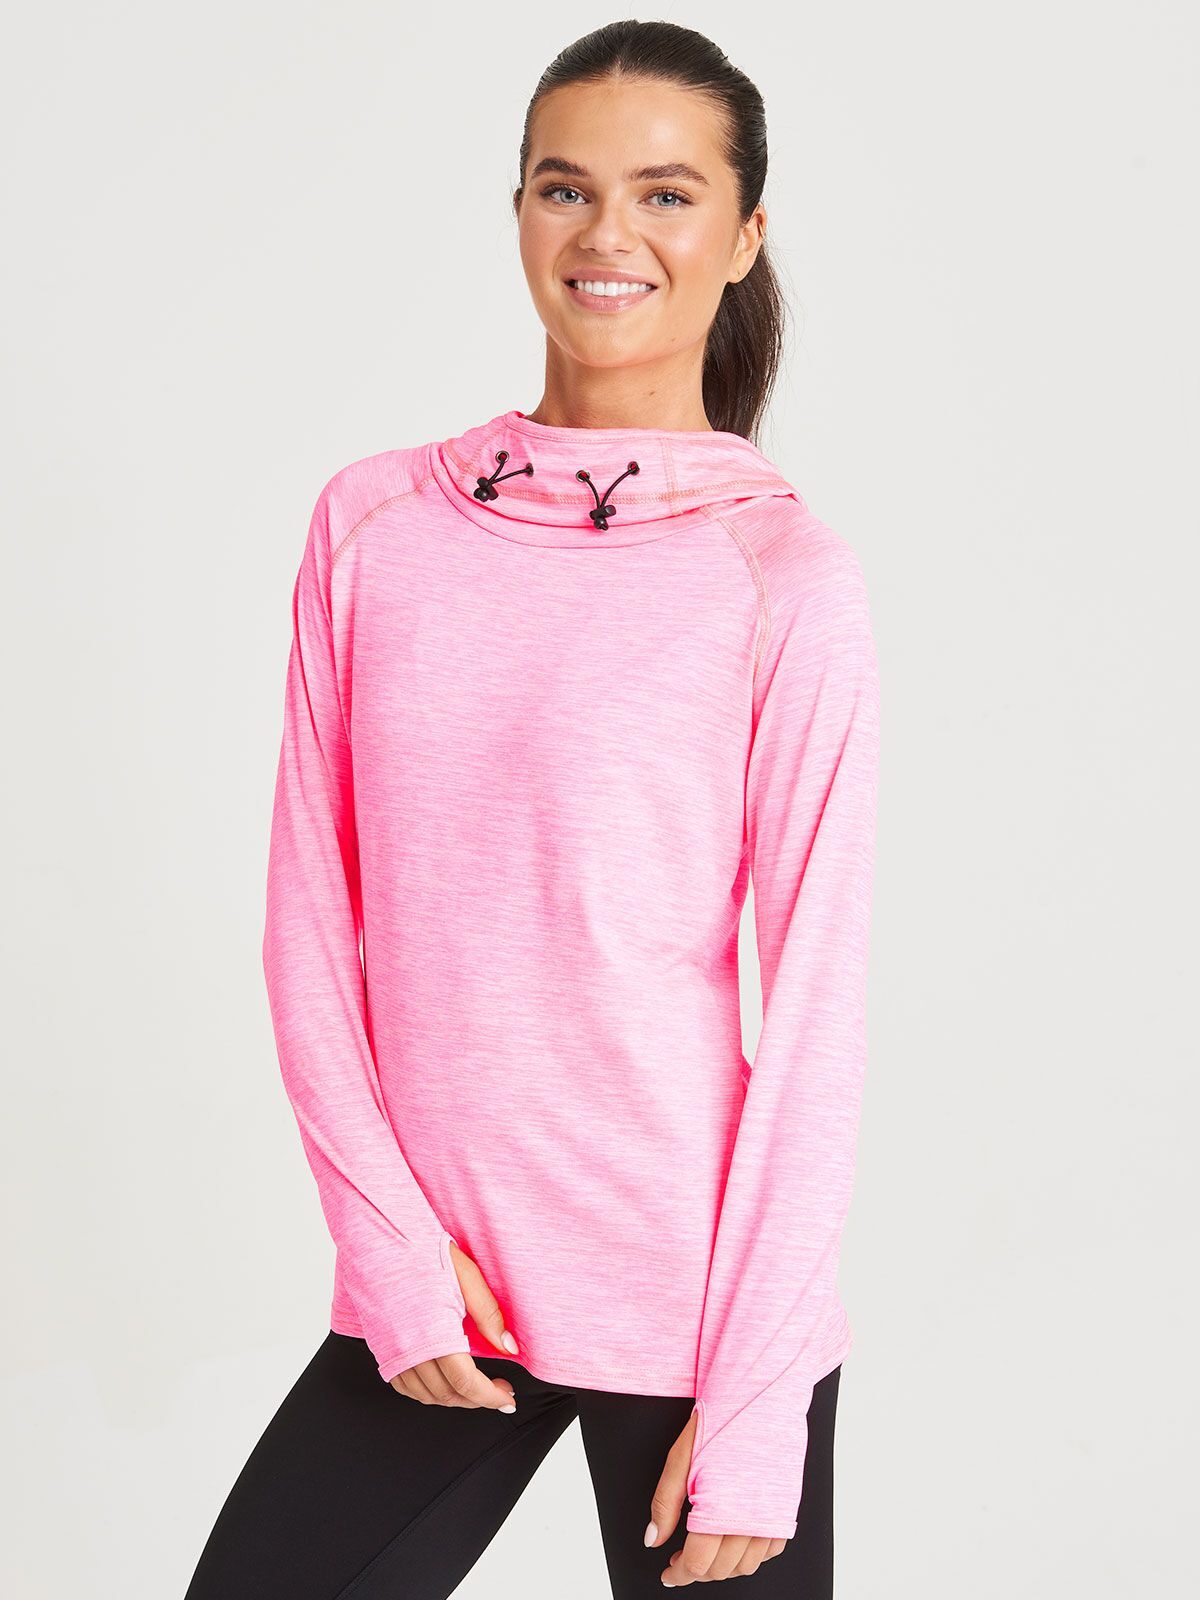 Girlie Cool Cowl Neck Top